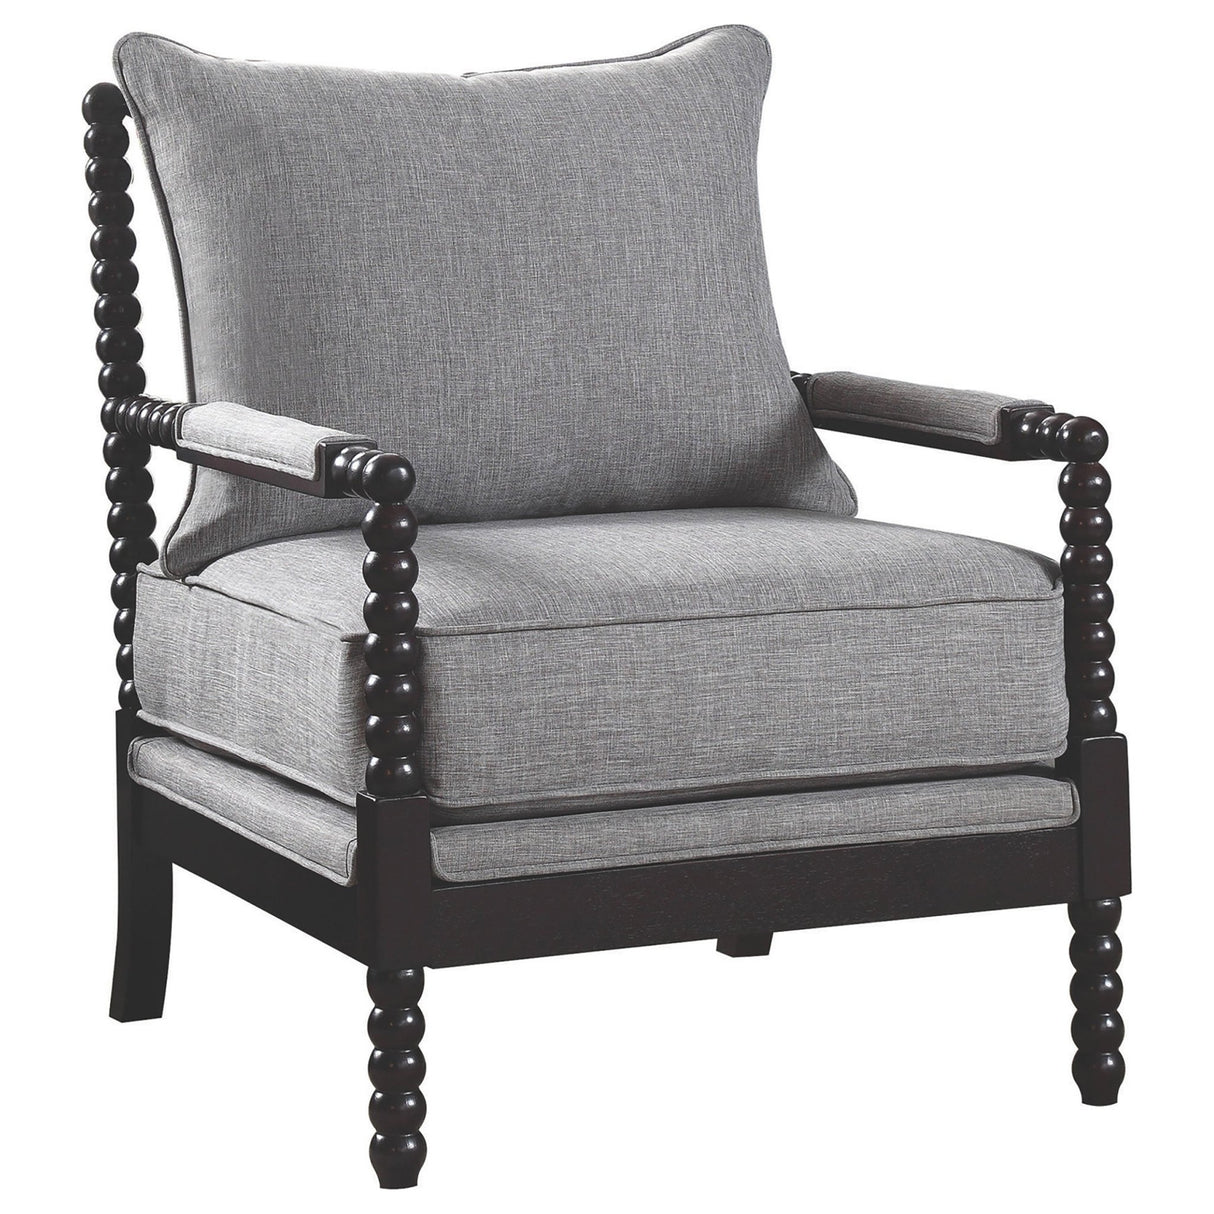 Accent Chair - Blanchett Cushion Back Accent Chair Grey and Black - Accent Chairs - 903824 - image - 1